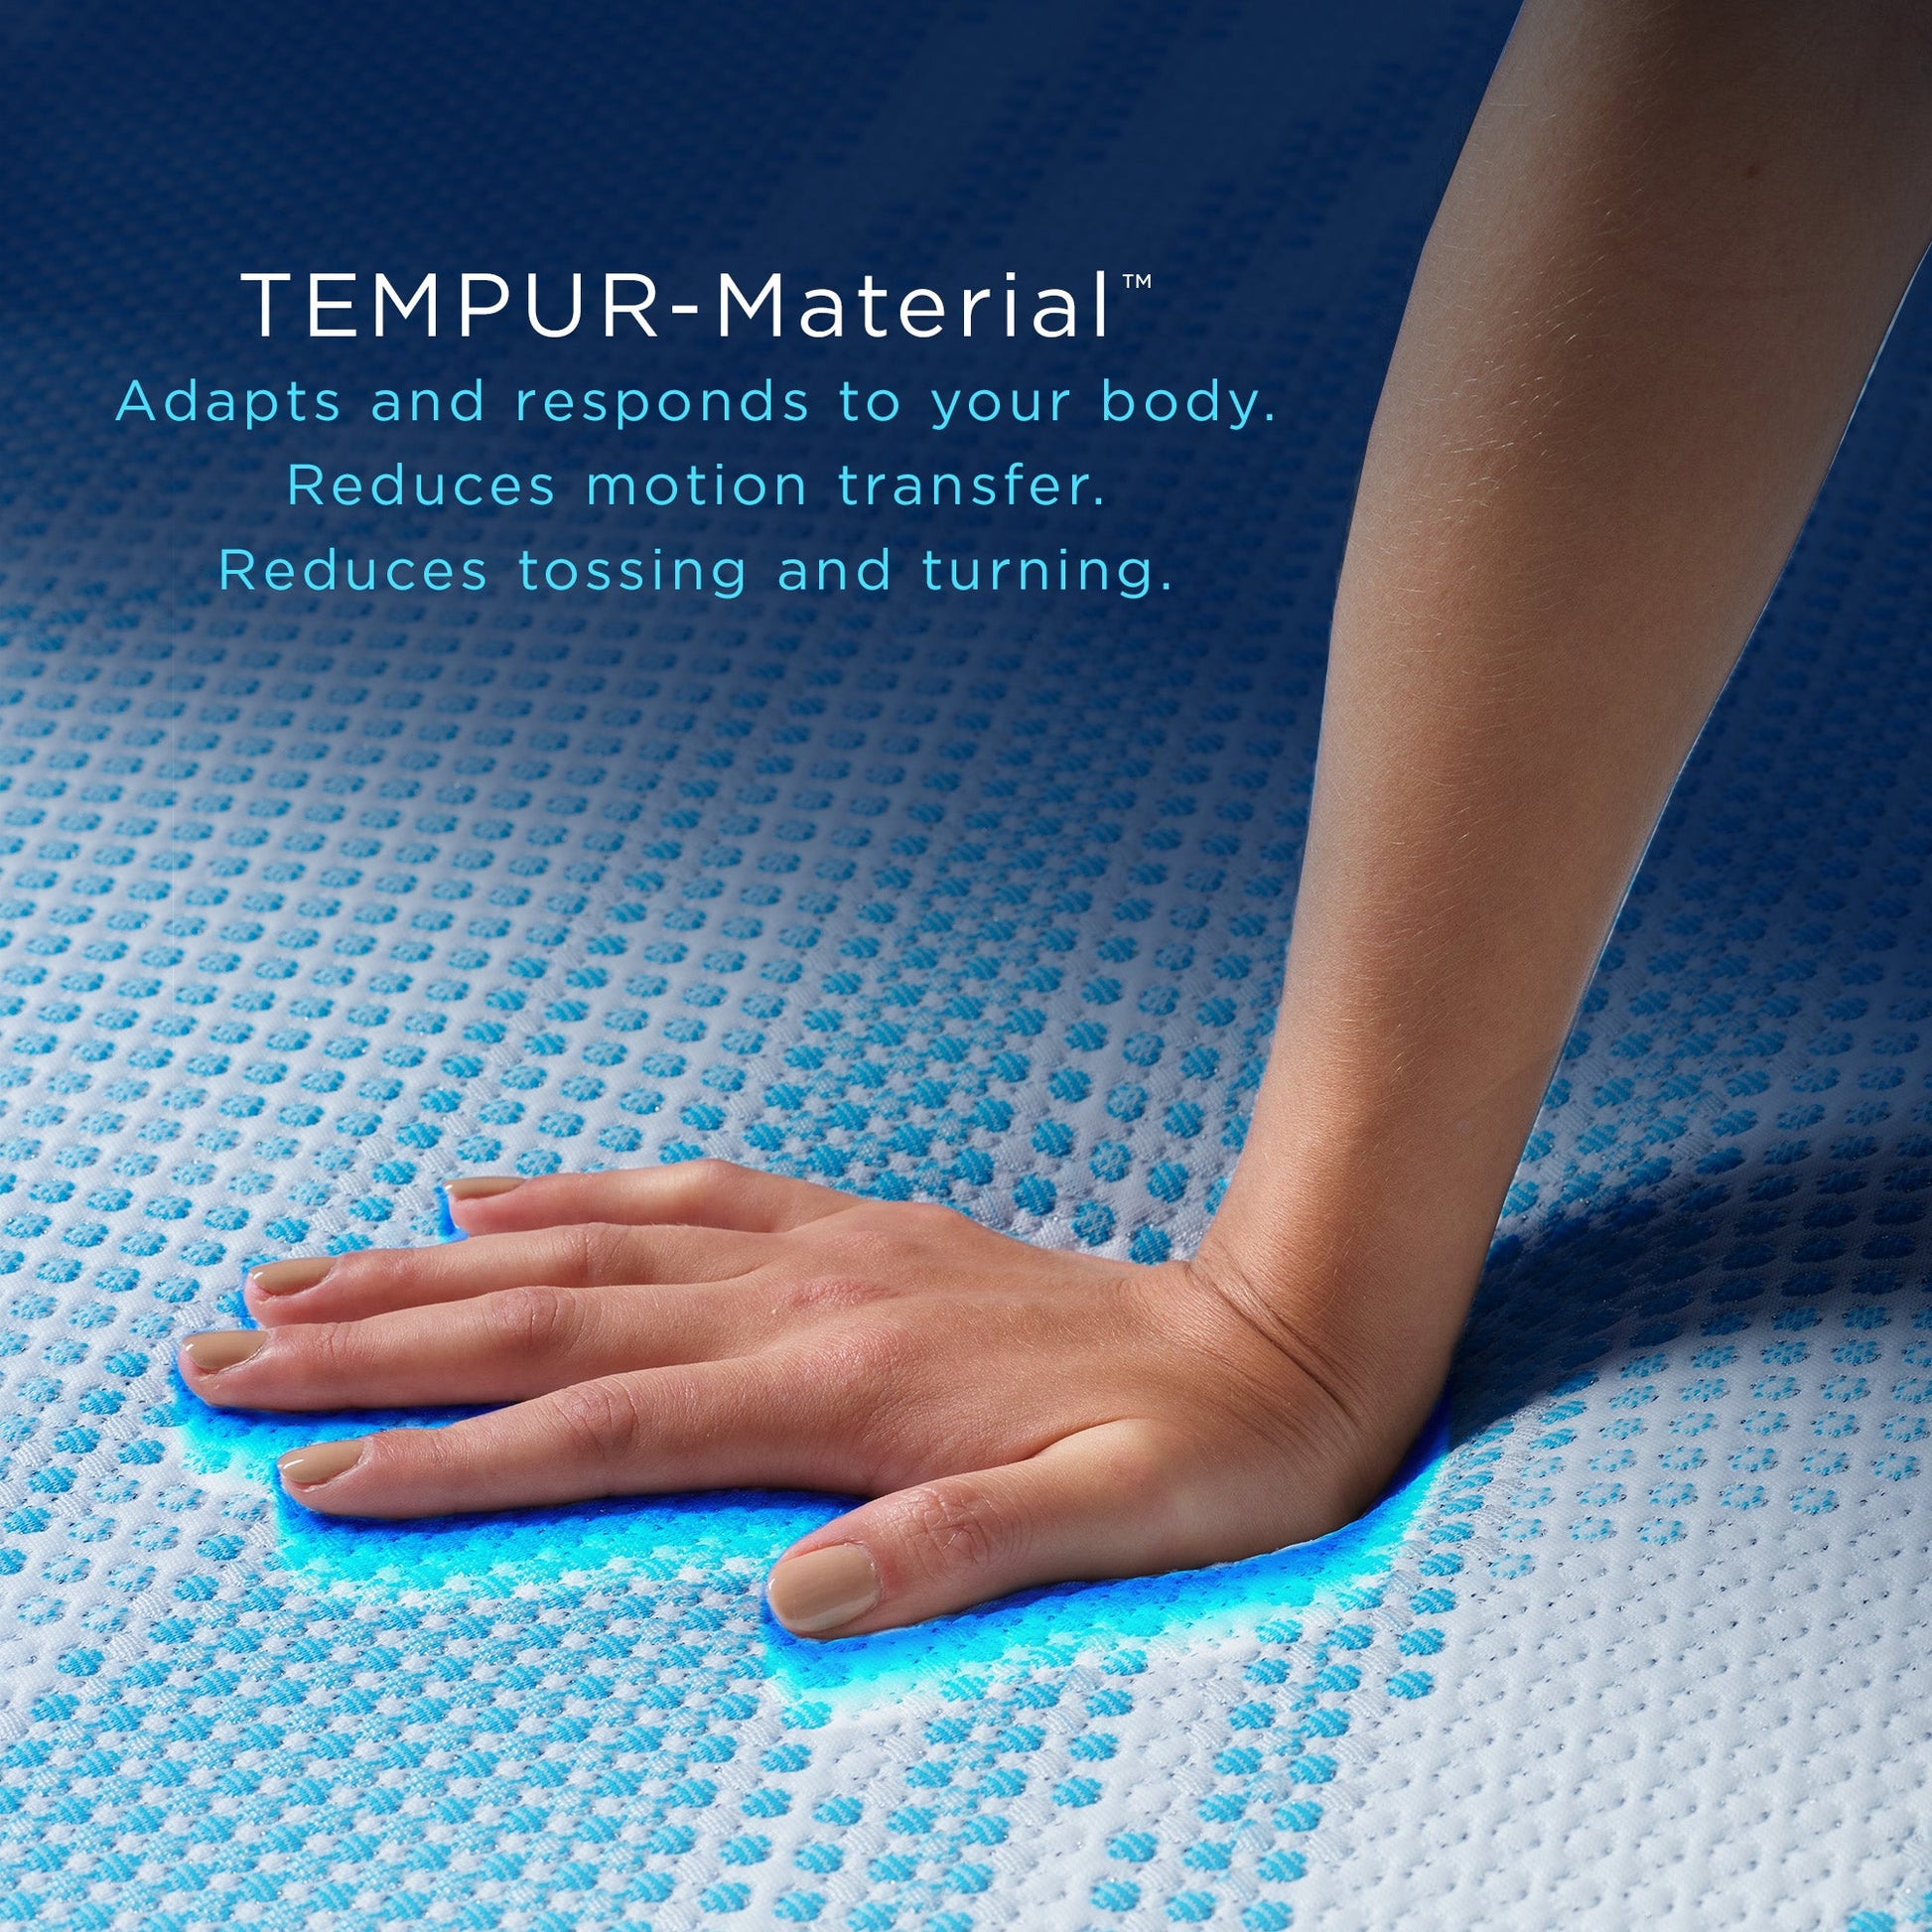 Tempur-Pedic Tempur-LuxeBreeze 2.0 Firm Mattress adapts and responds to your body